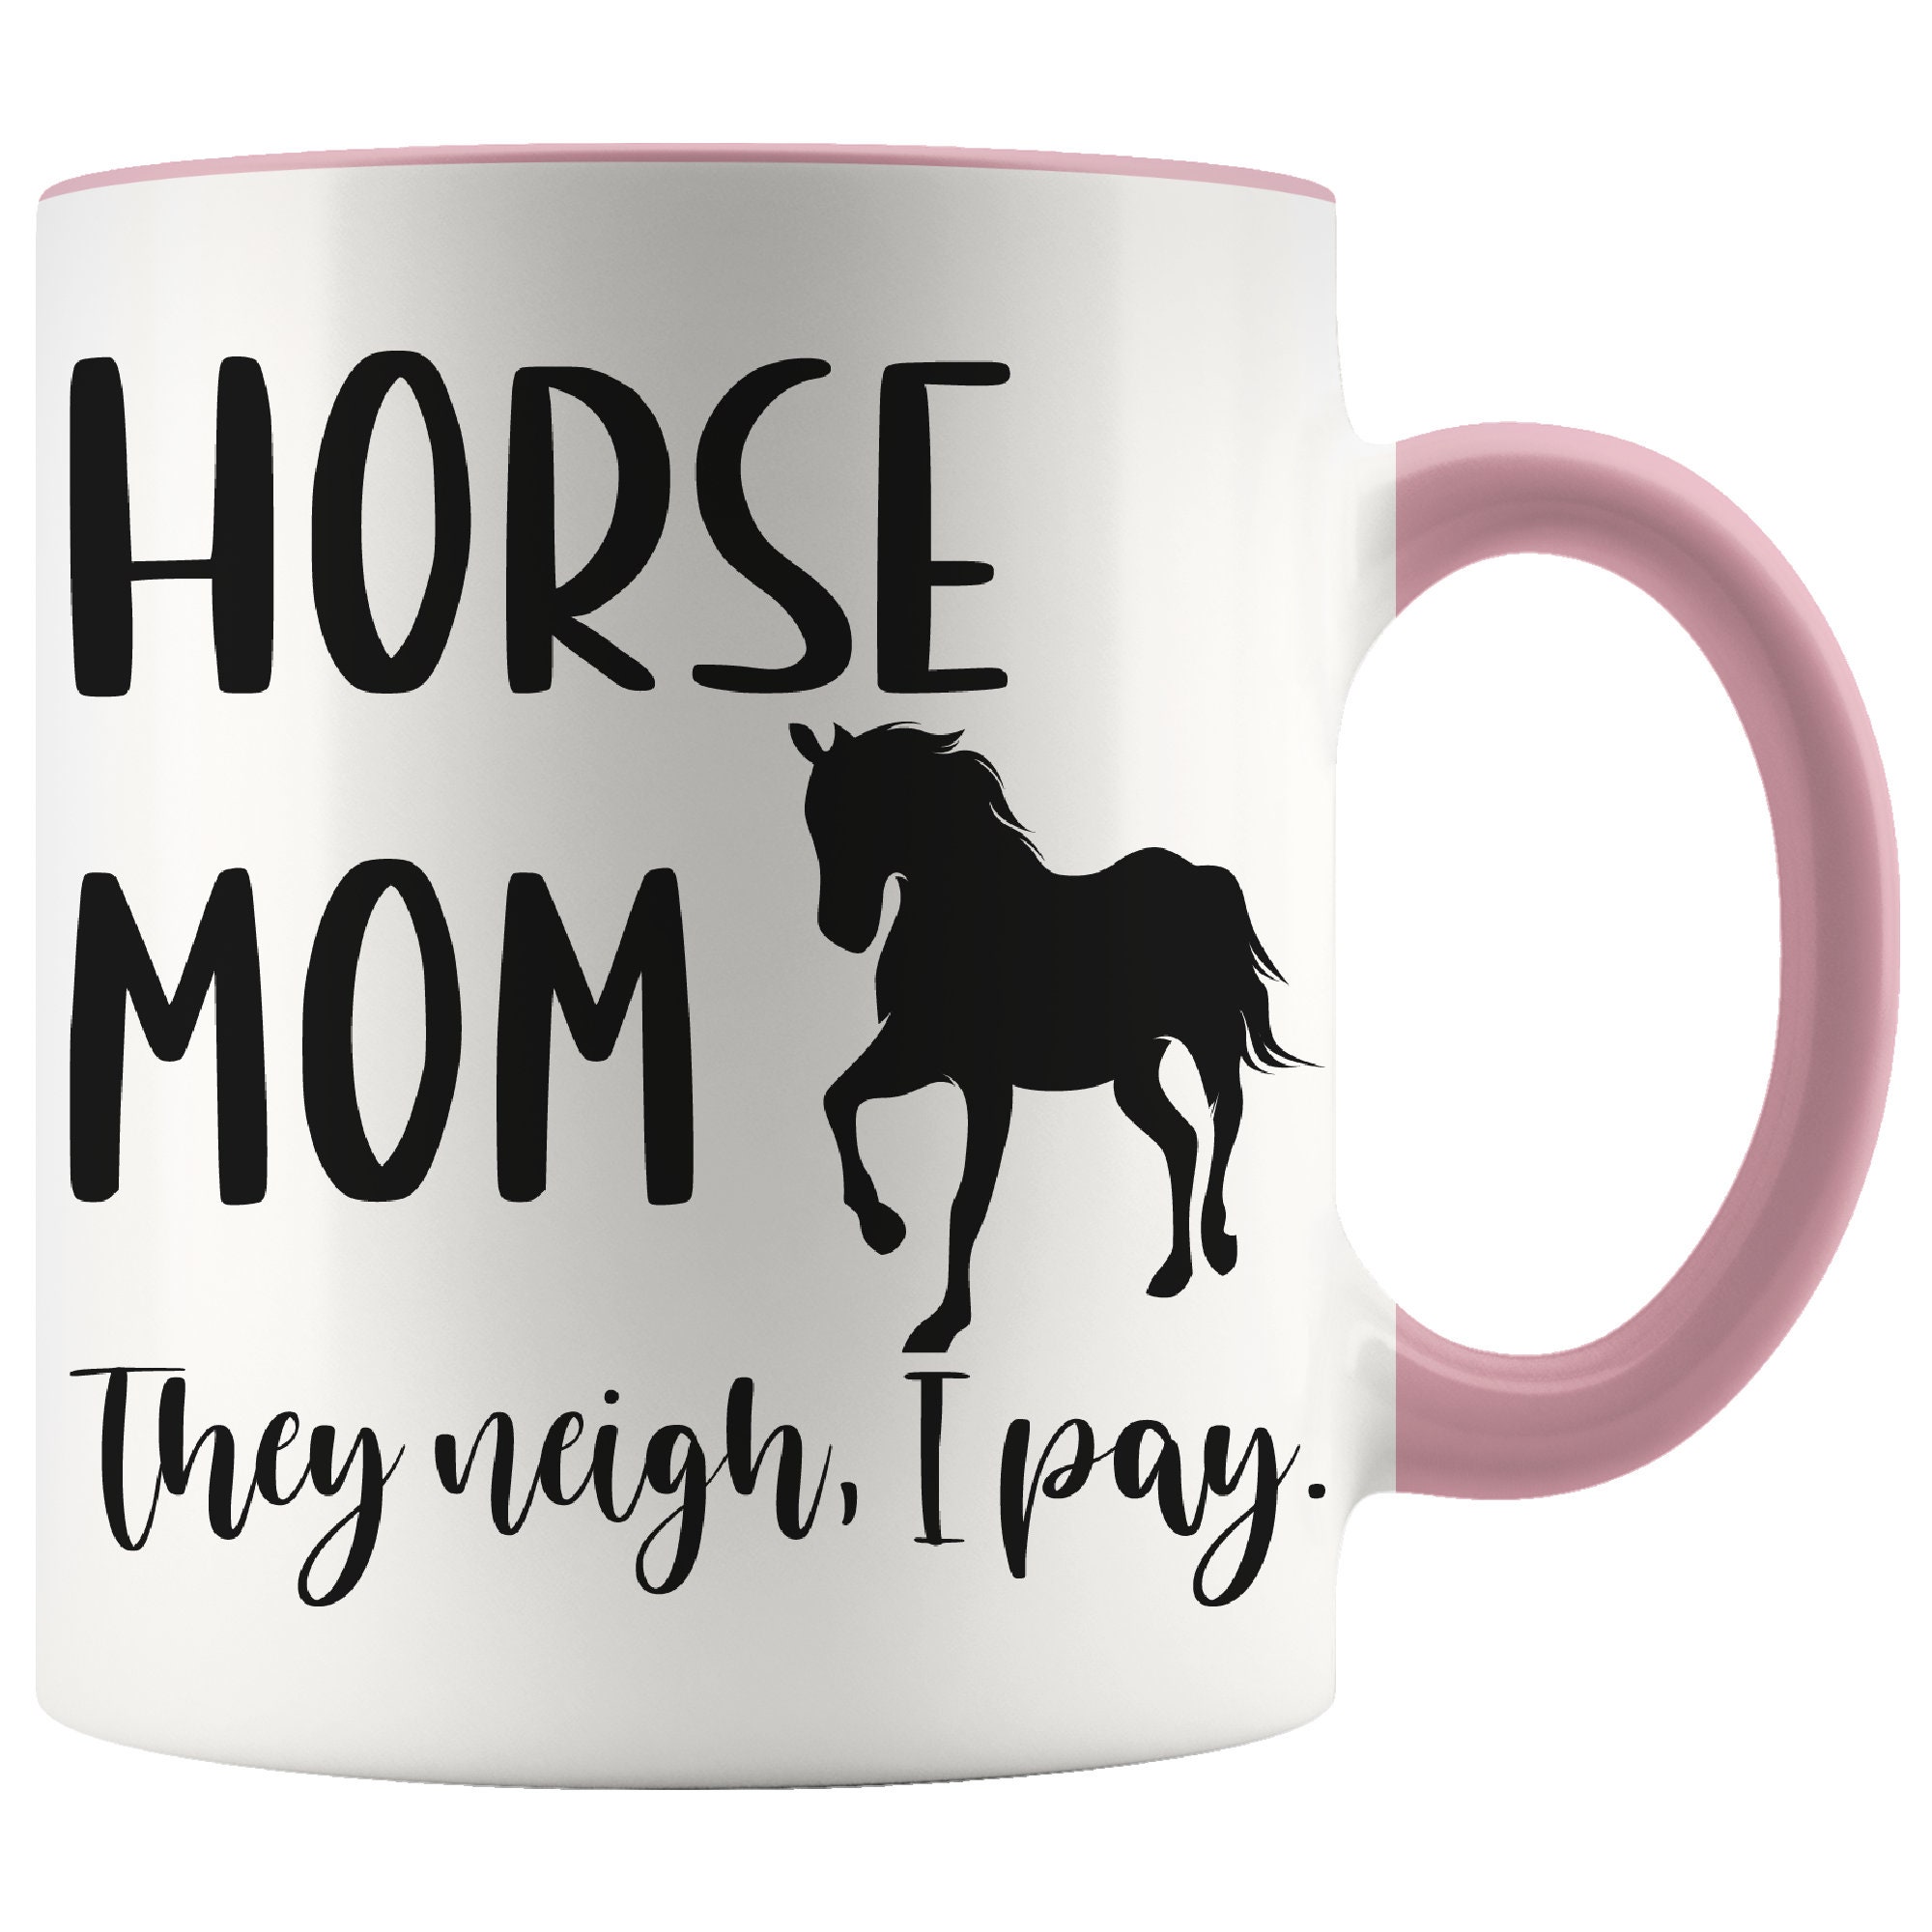 Horse Mug Mother's Day Gift Horse Mom Coffee Mug They Neigh I Pay Horse mom Gift idea Equestrian Love Horse Horse Lover Gift